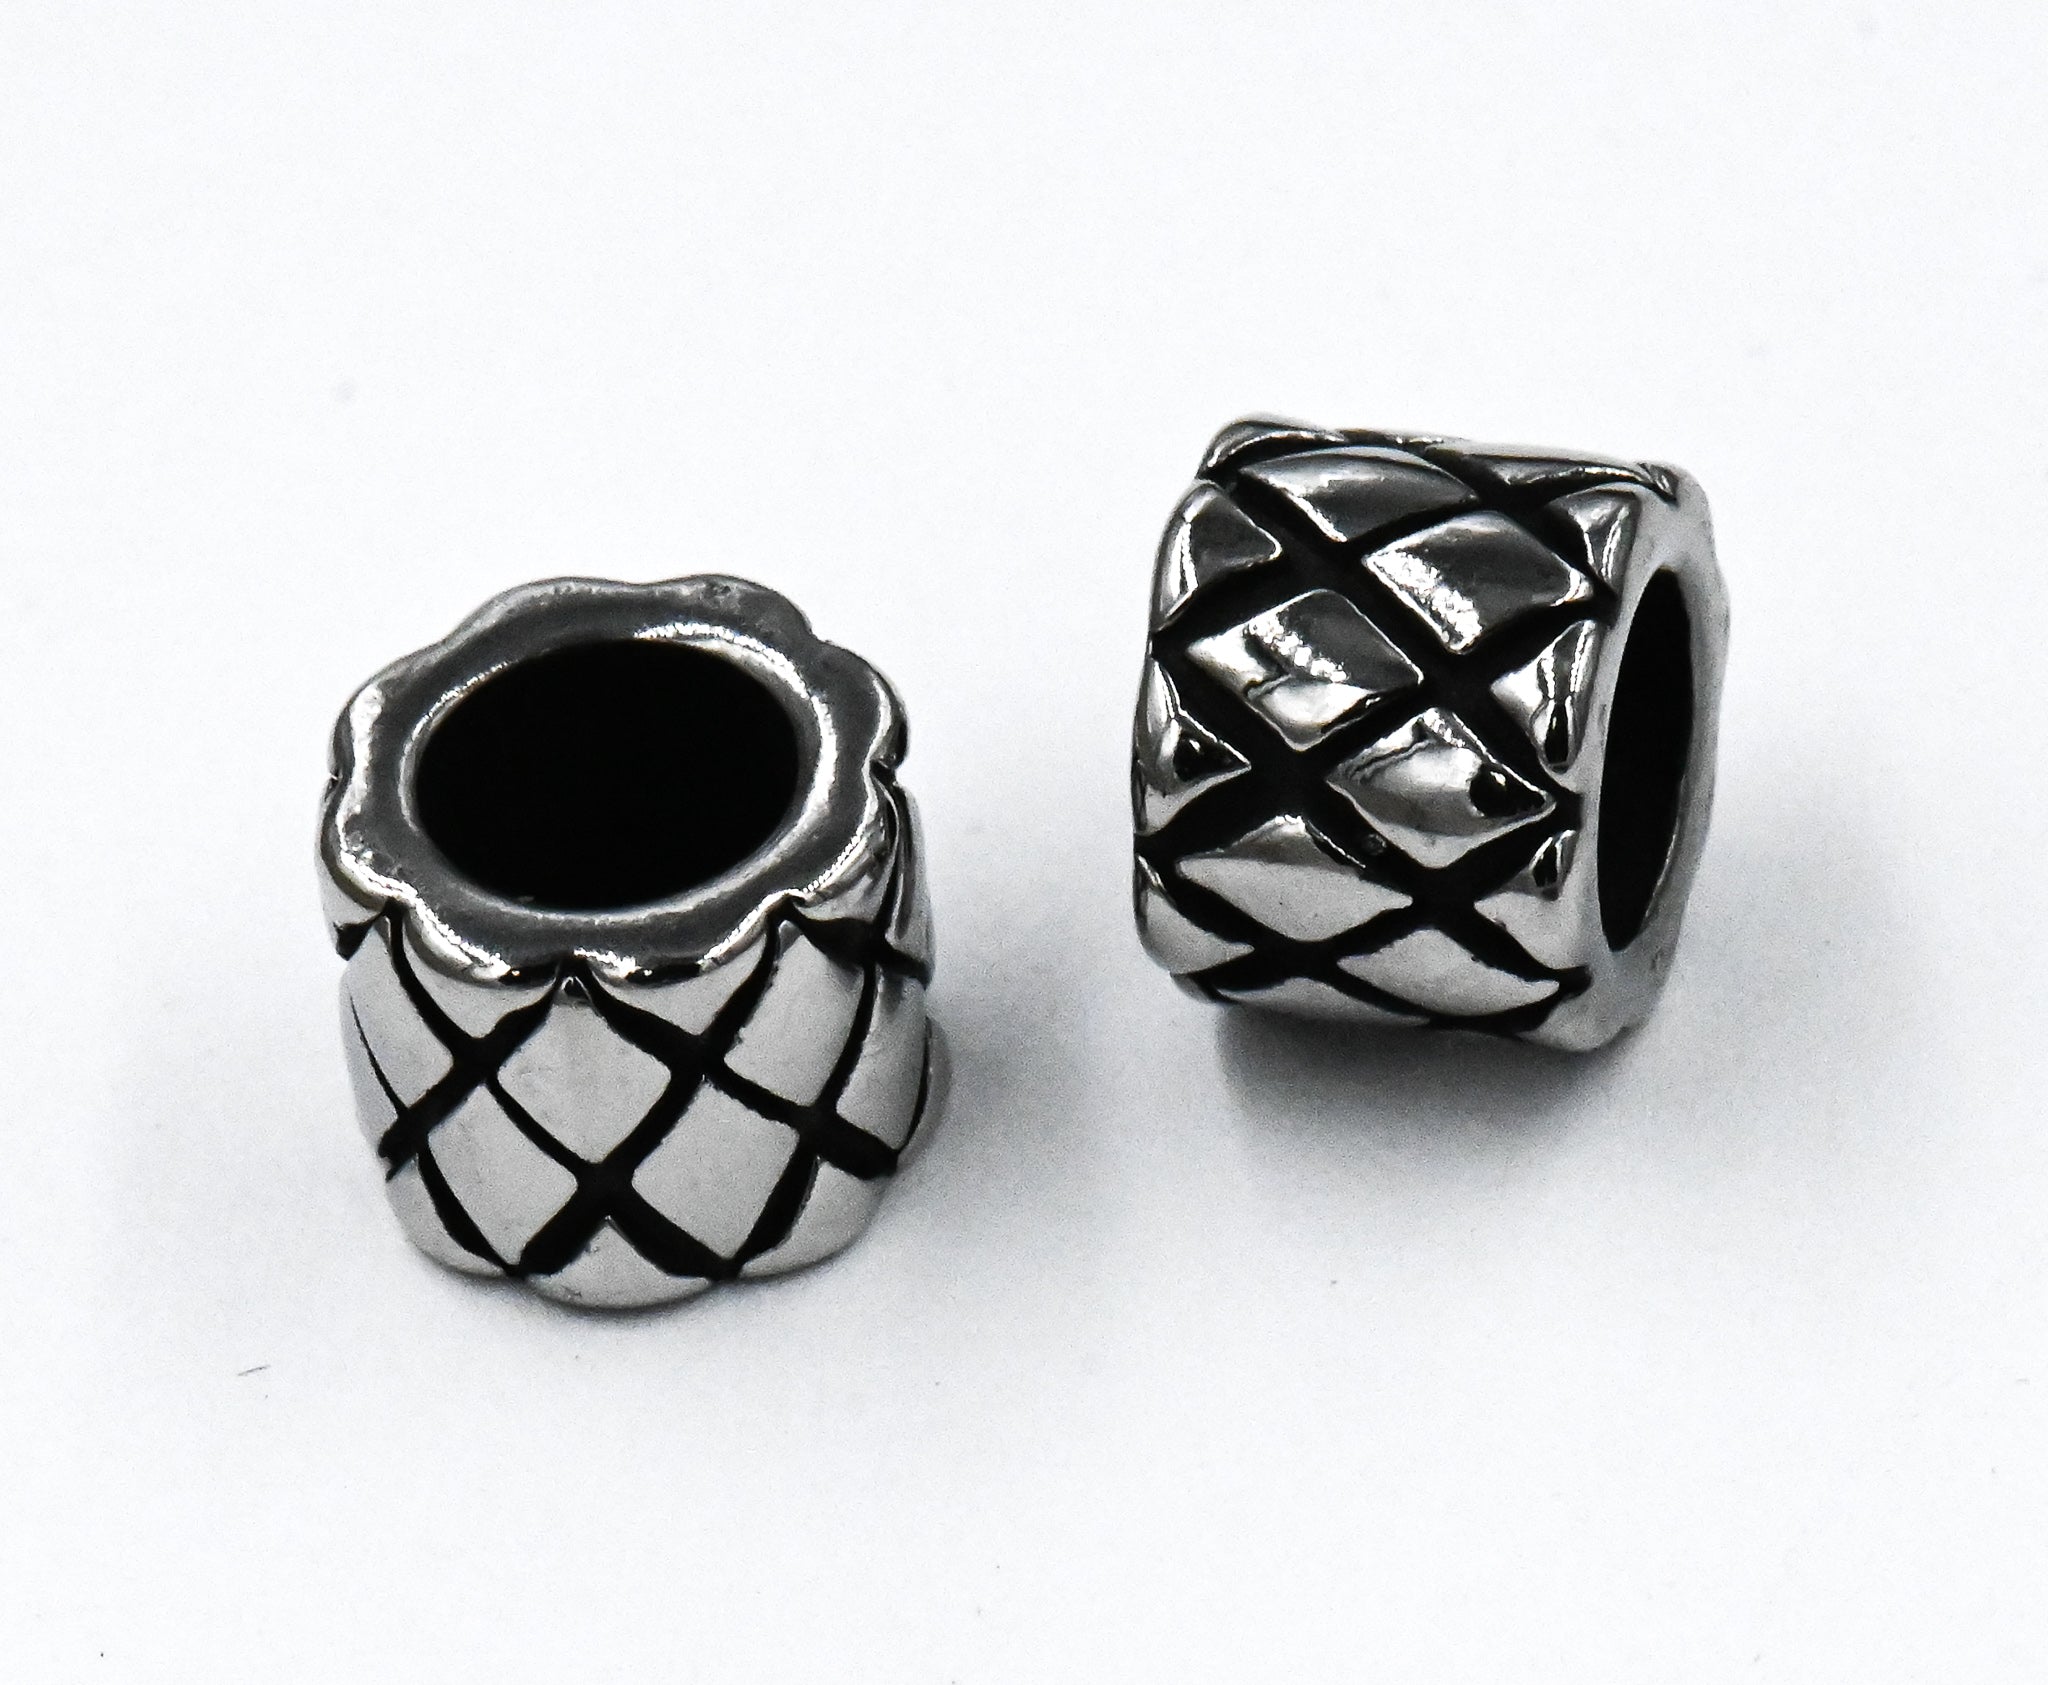 Stainless Steel Beads, 2pc Large Hole Beads, Column with Braided Pattern, Antique Silver, 9mm